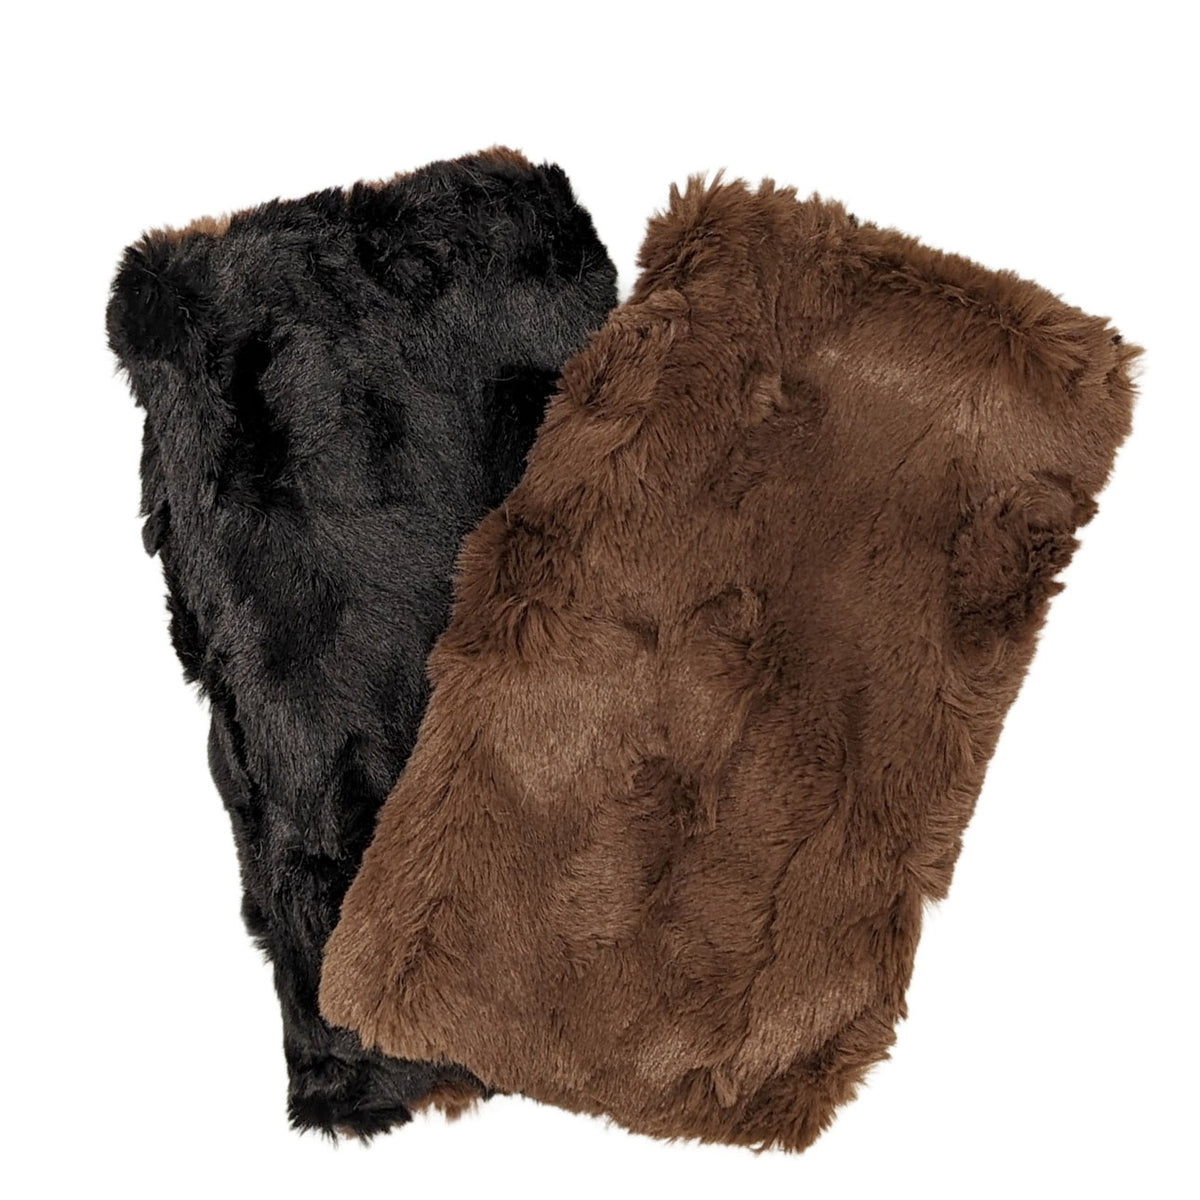 Fingerless Texting Gloves | Cuddly Faux Fur in Chocolate lined Black Faux Fur | Pandemonium Millinery